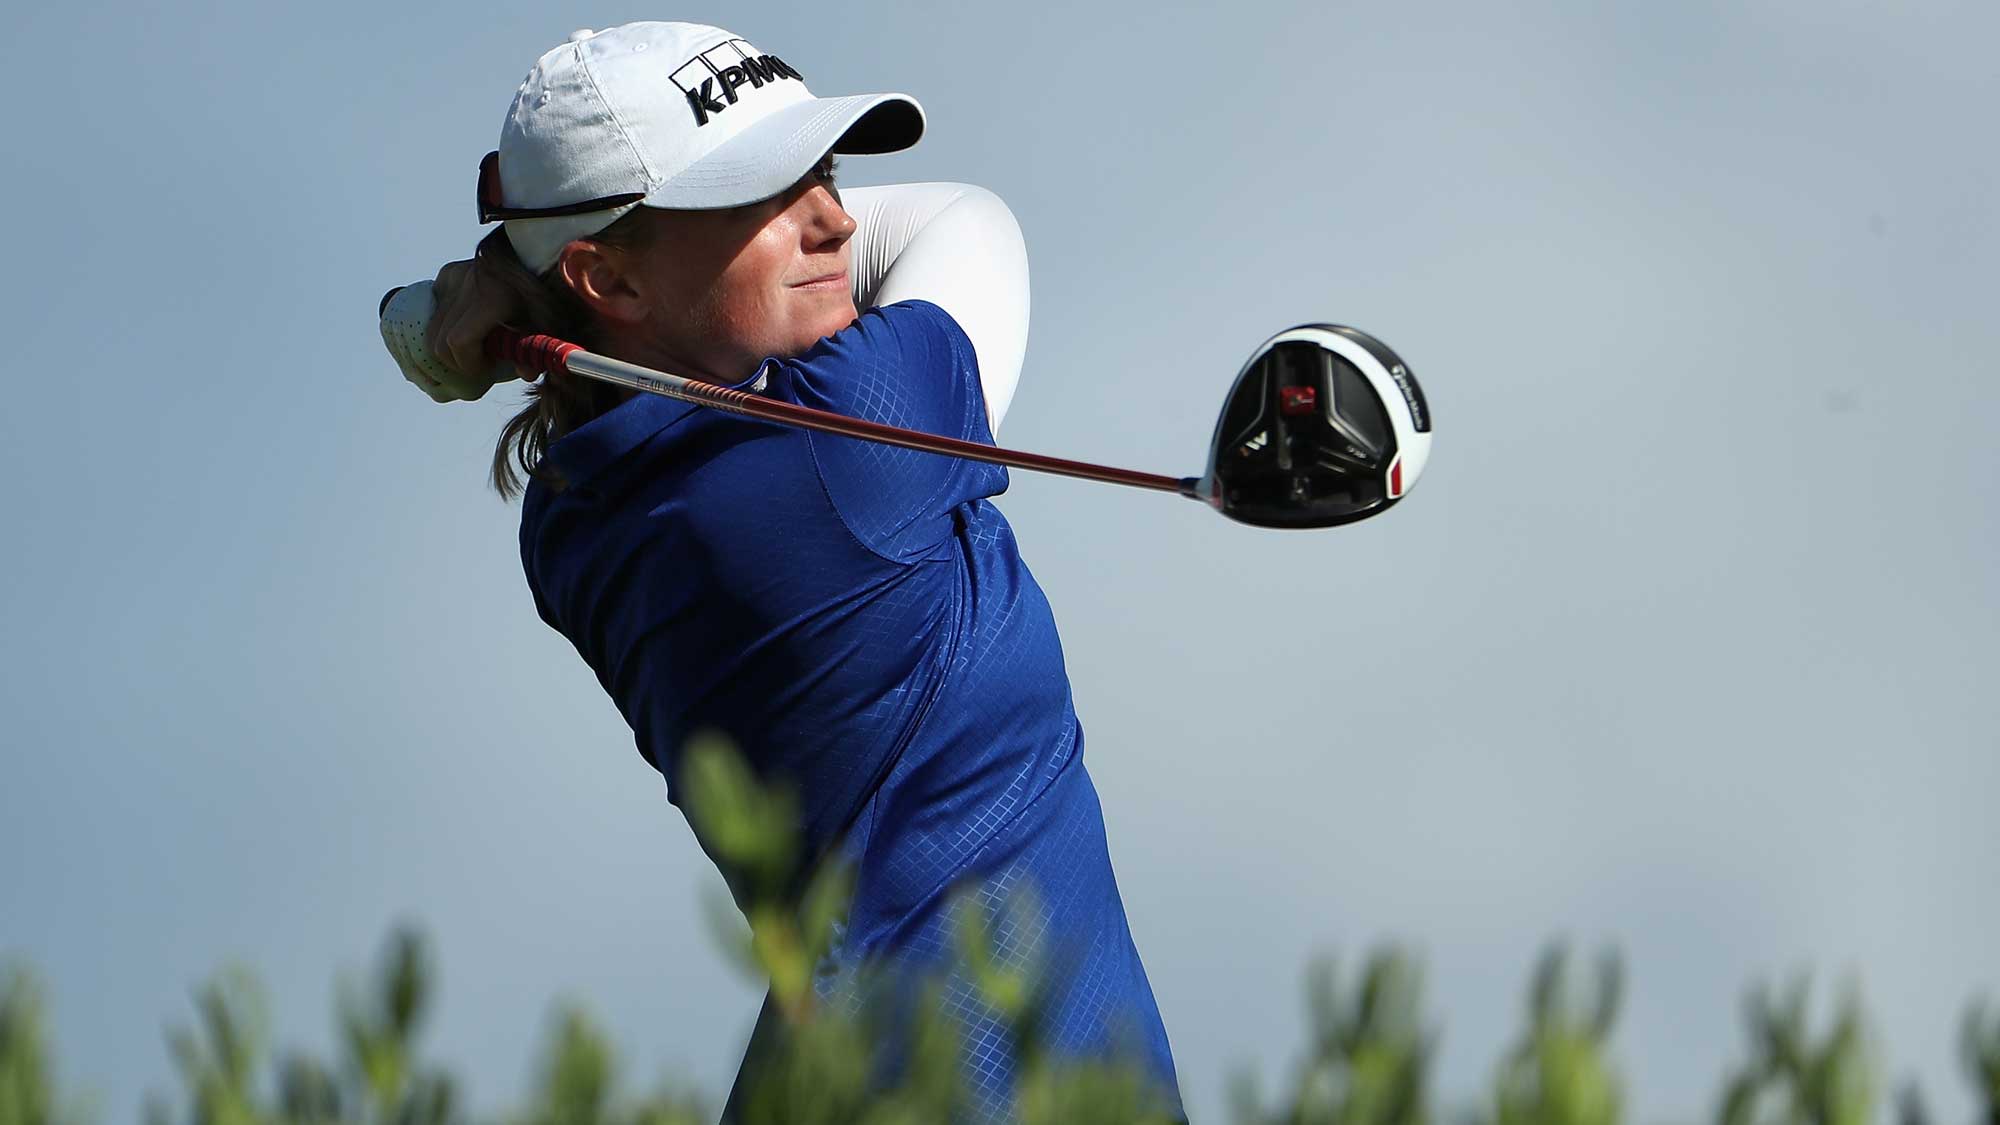 Stacy Lewis plays a tee shot on the 13th hole during the first round of the LPGA LOTTE Championship Presented By Hershey